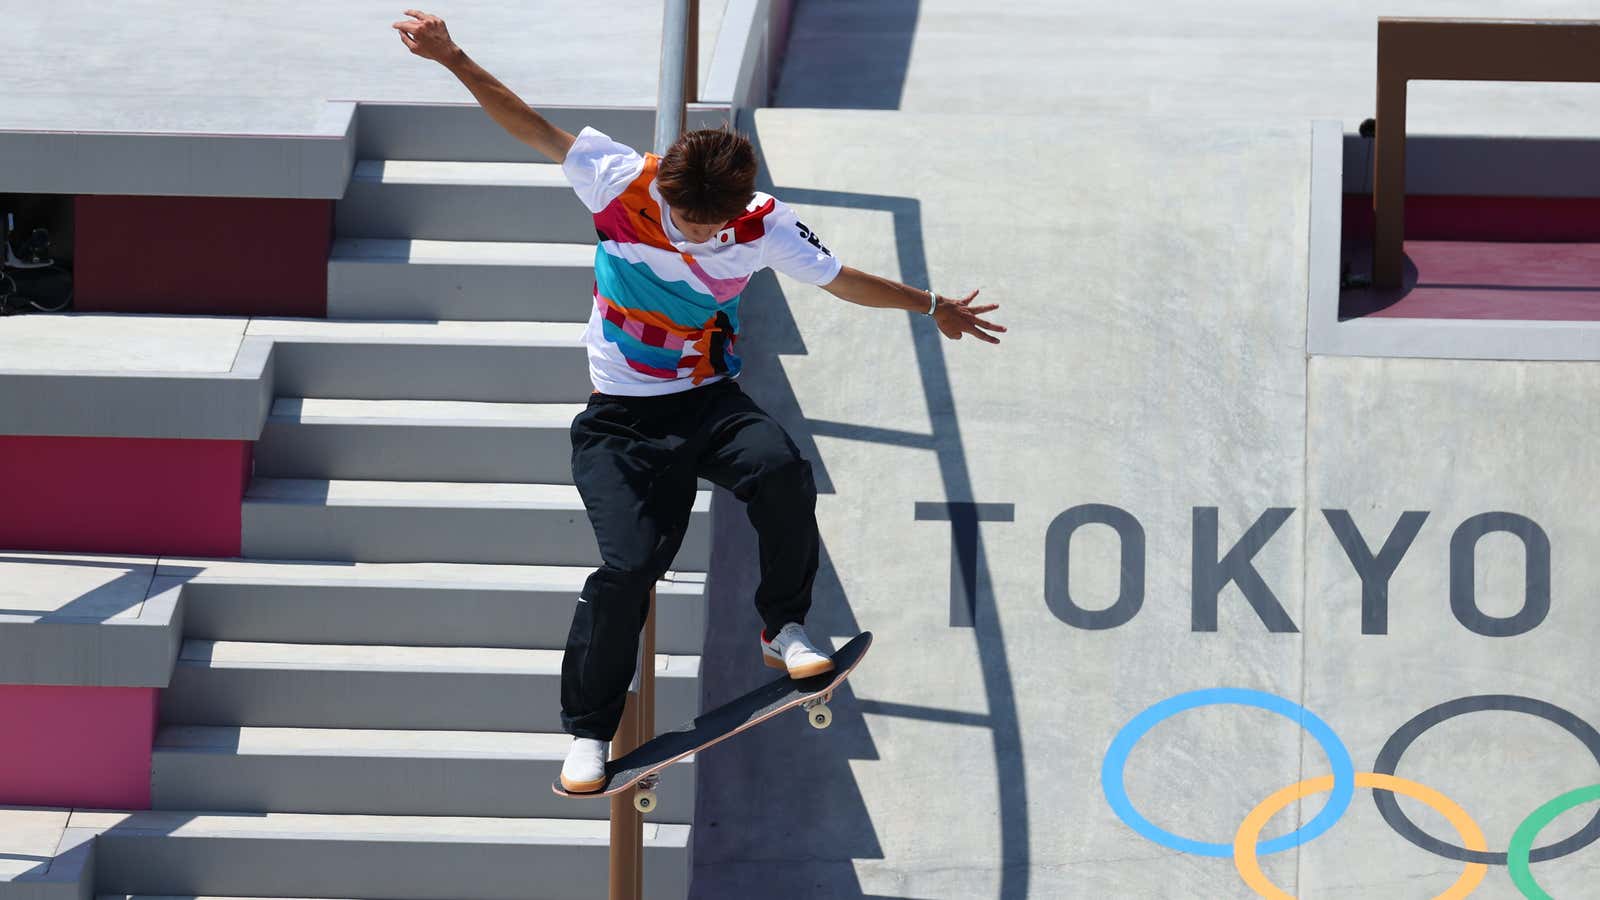 Yuto Horigome of Japan, the world’s first Olympic gold medalist in skateboarding.